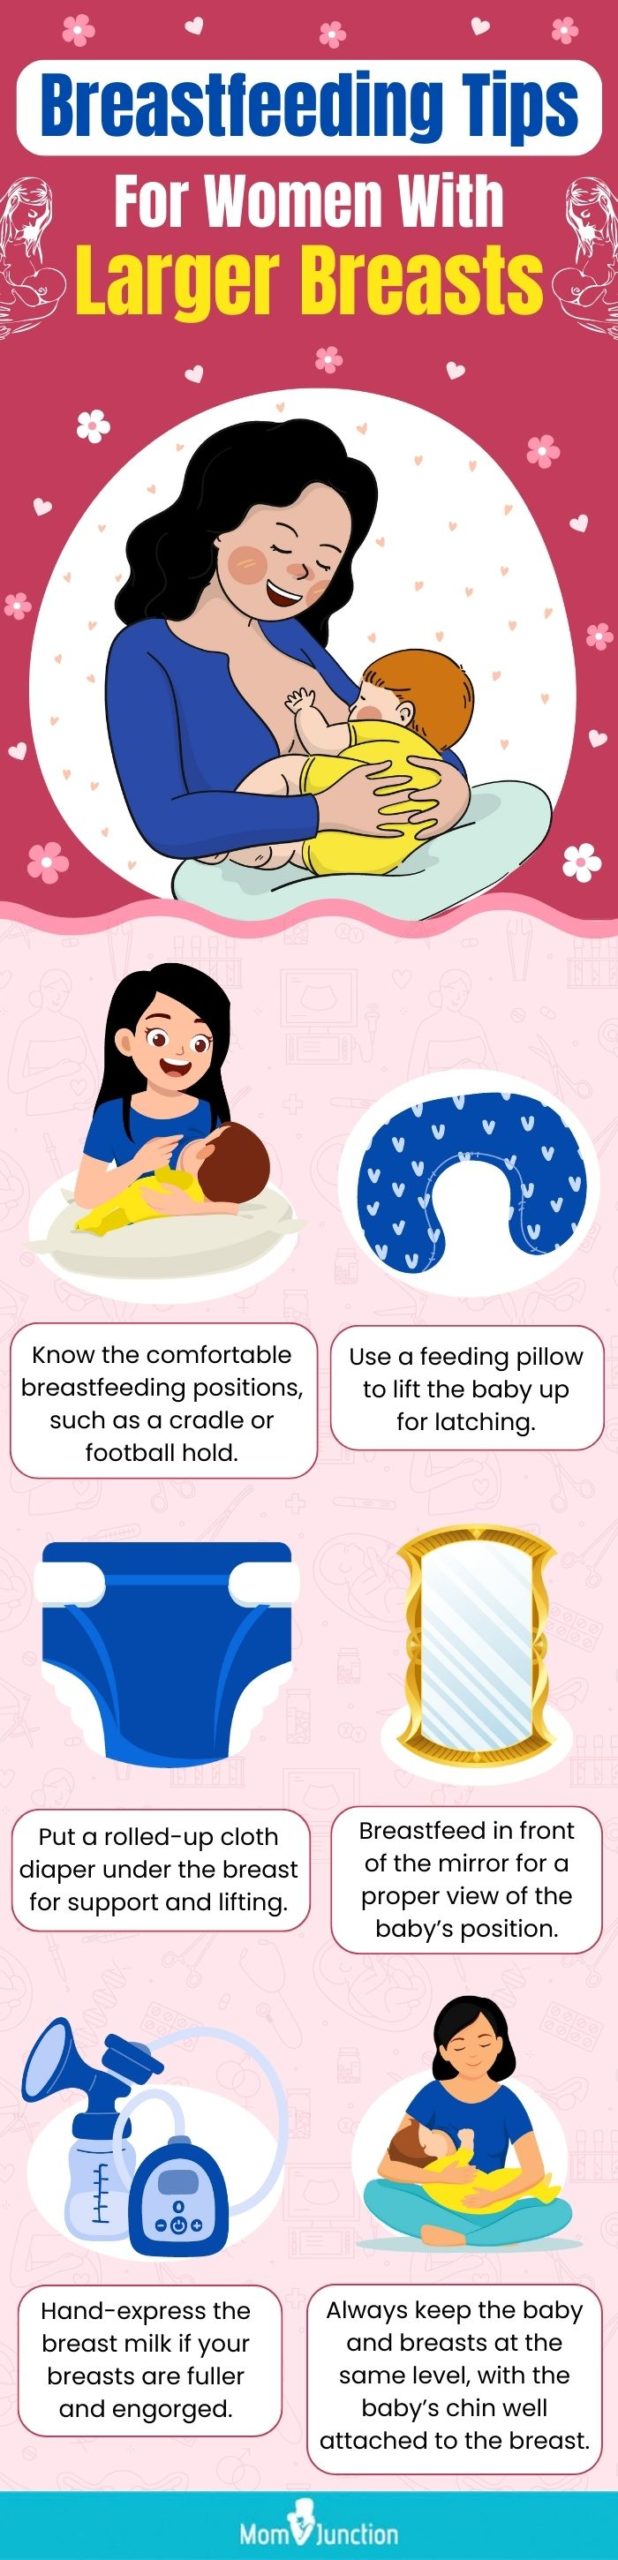 breastfeeding tips for women with larger breasts (infographic) 